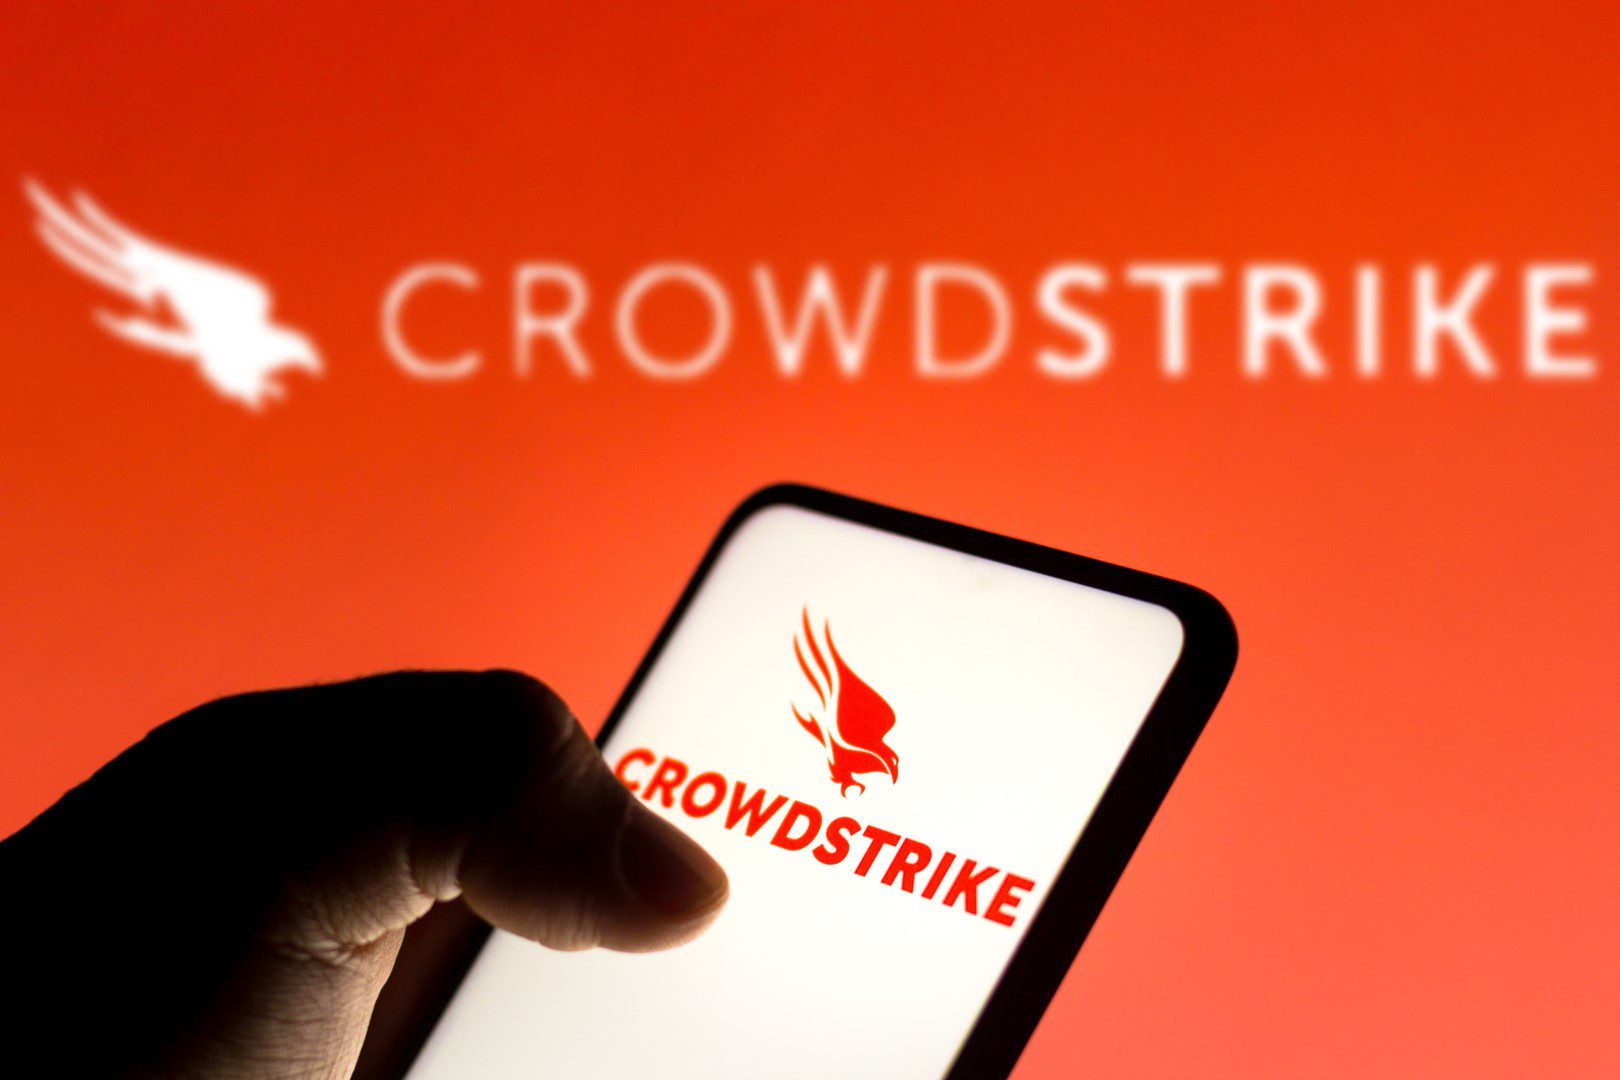 crowdstrike-falcon-insight-omarmt-xdr-security-itdaily